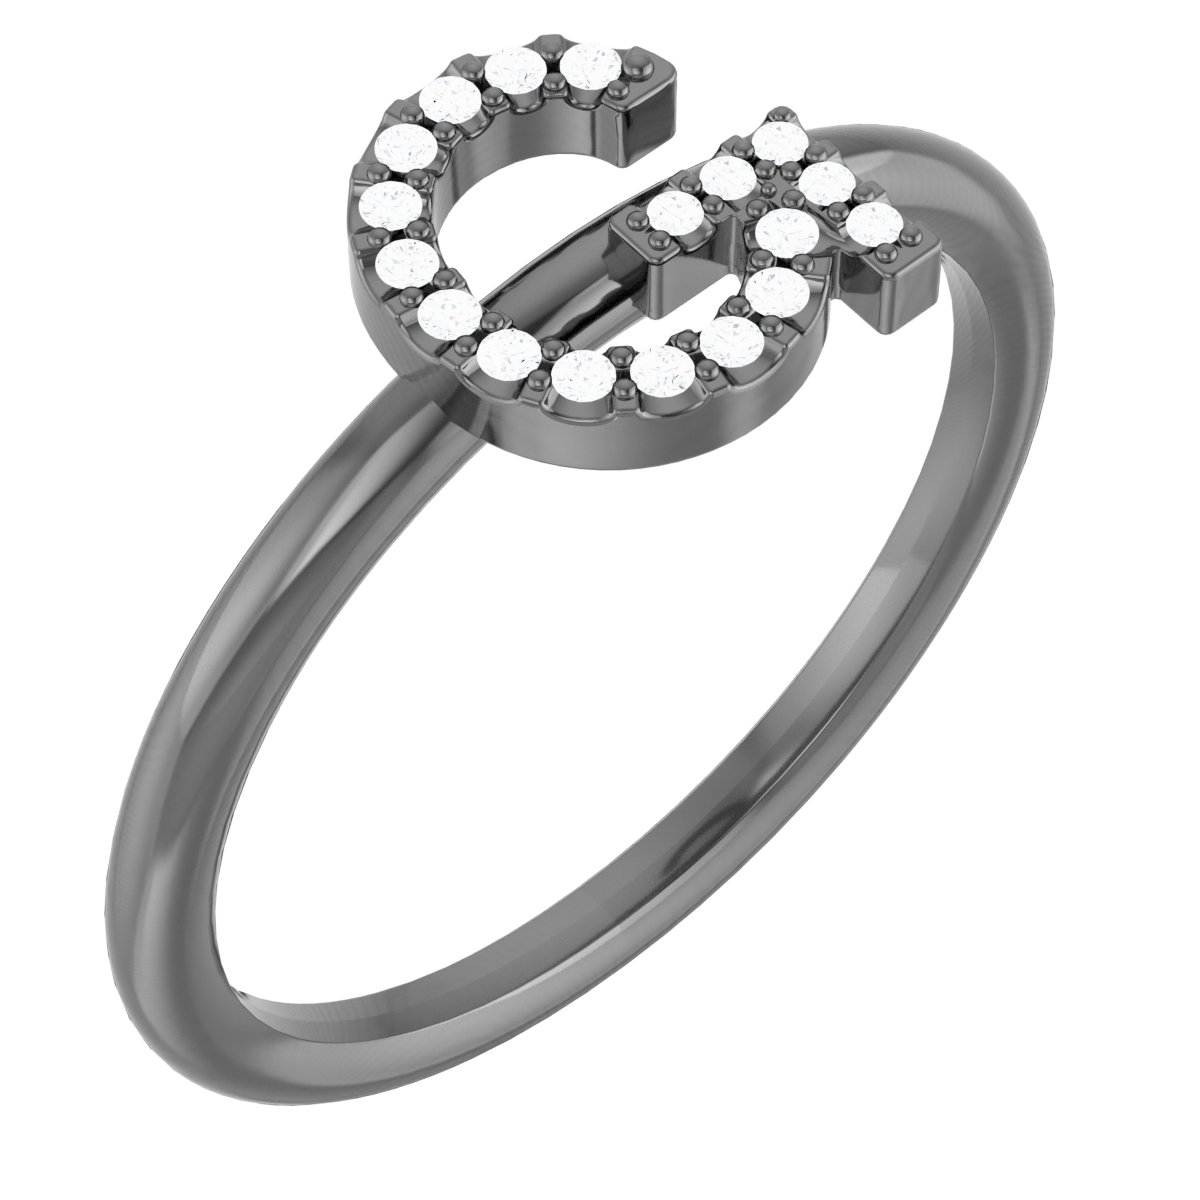 Sterling Silver .06 CTW Diamond Initial G Ring Ref. 15158601